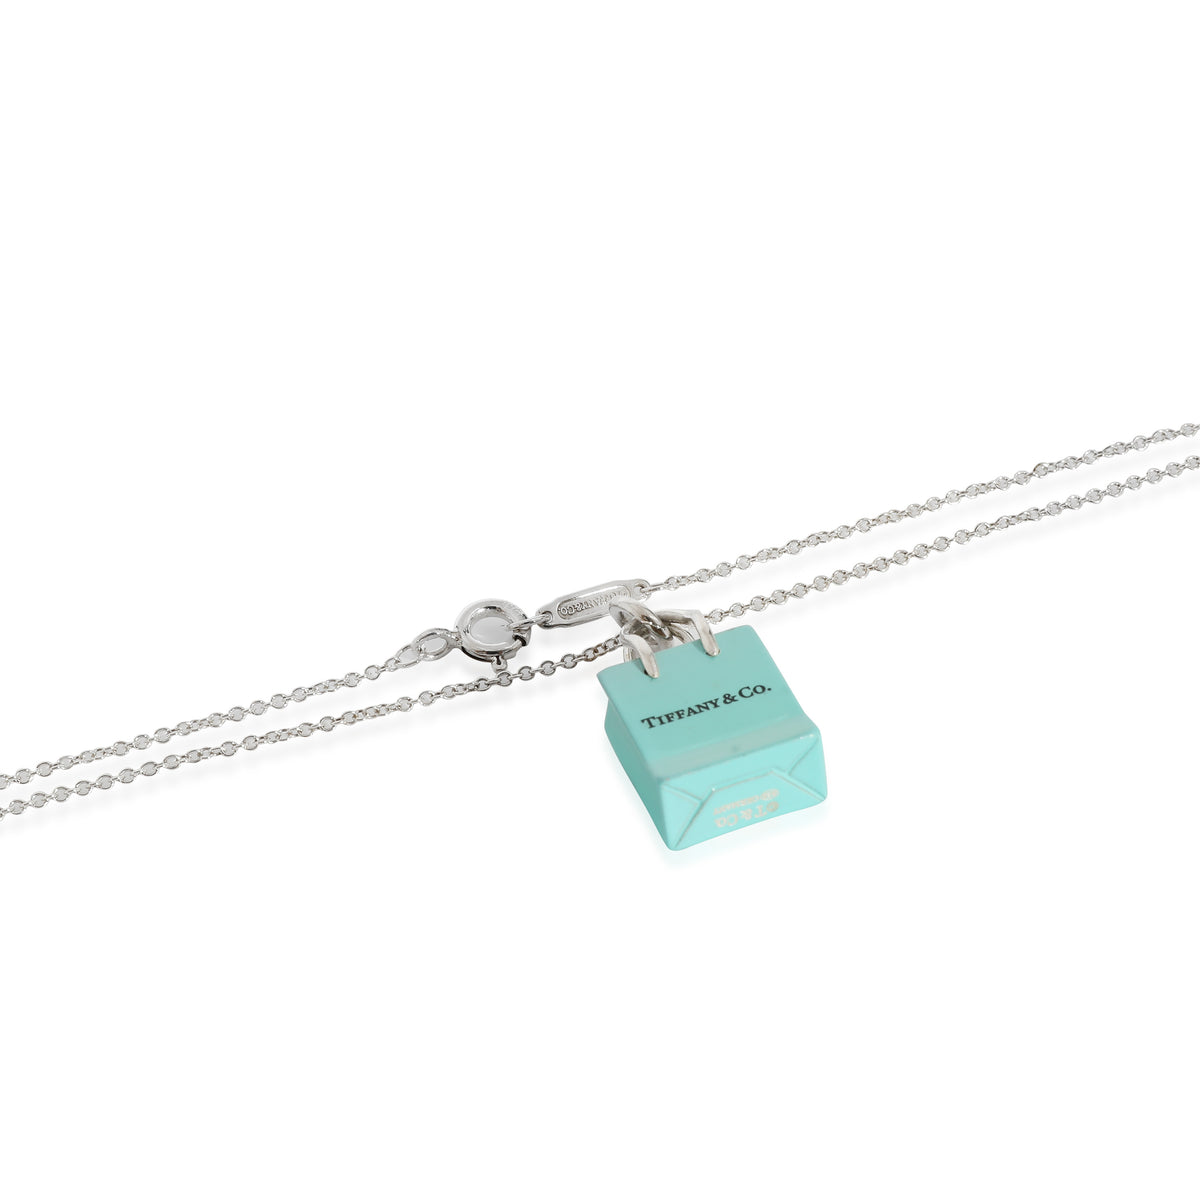 Tiffany & Co. Blue Enamel Shopping Bag Charm Necklace in Sterling Silver